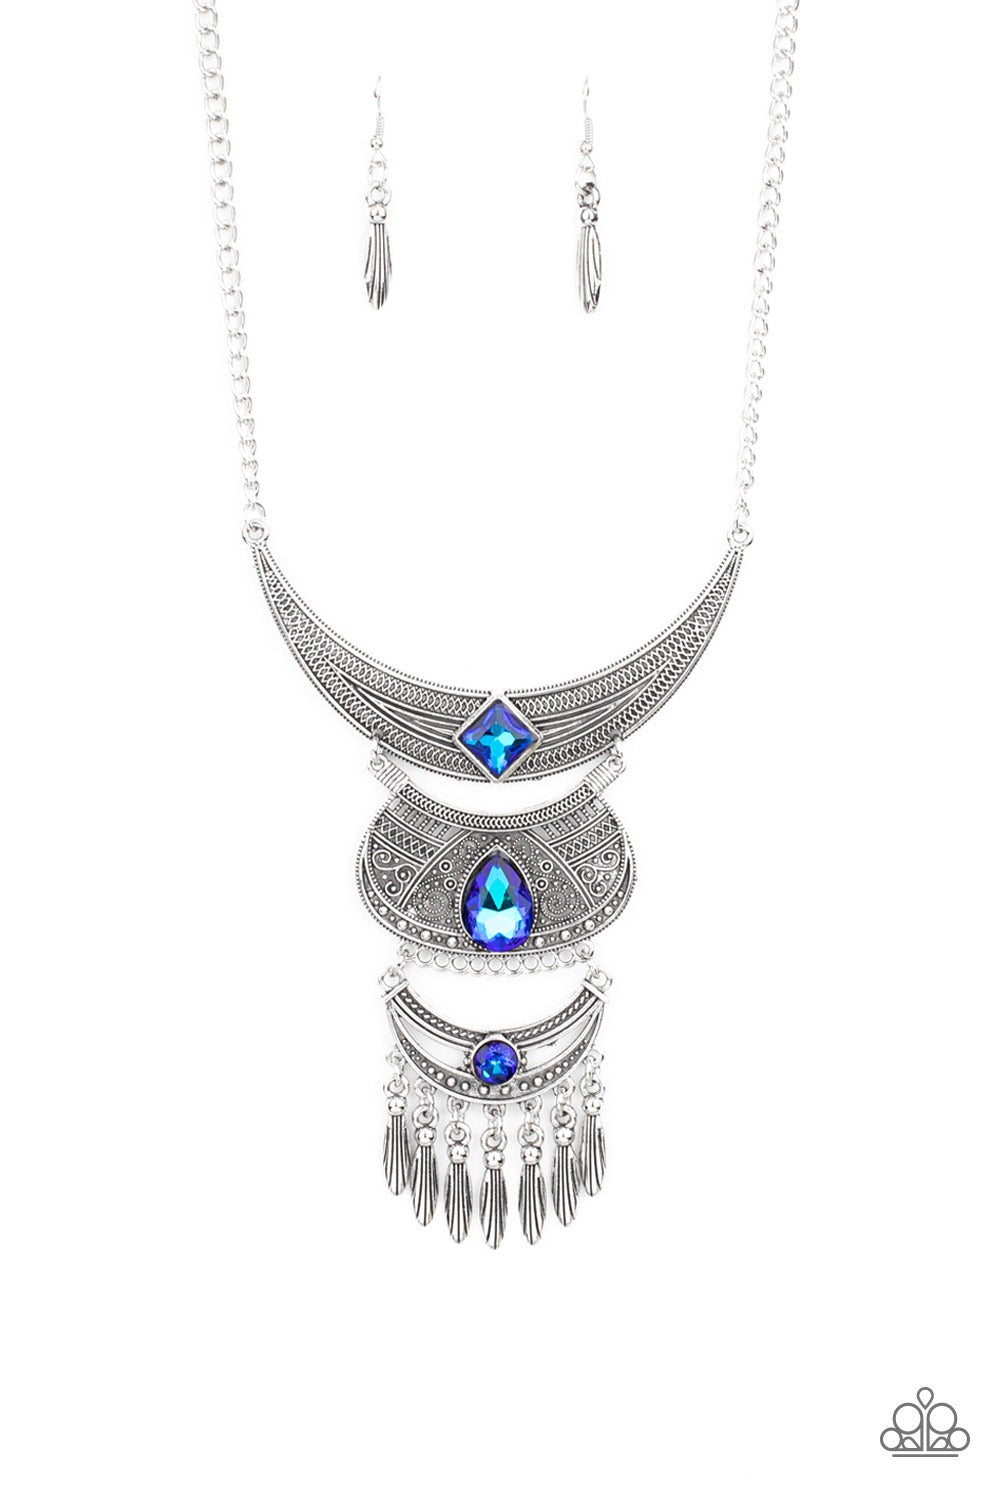 Paparazzi Accessories - Egyptian Spell - Blue Necklace